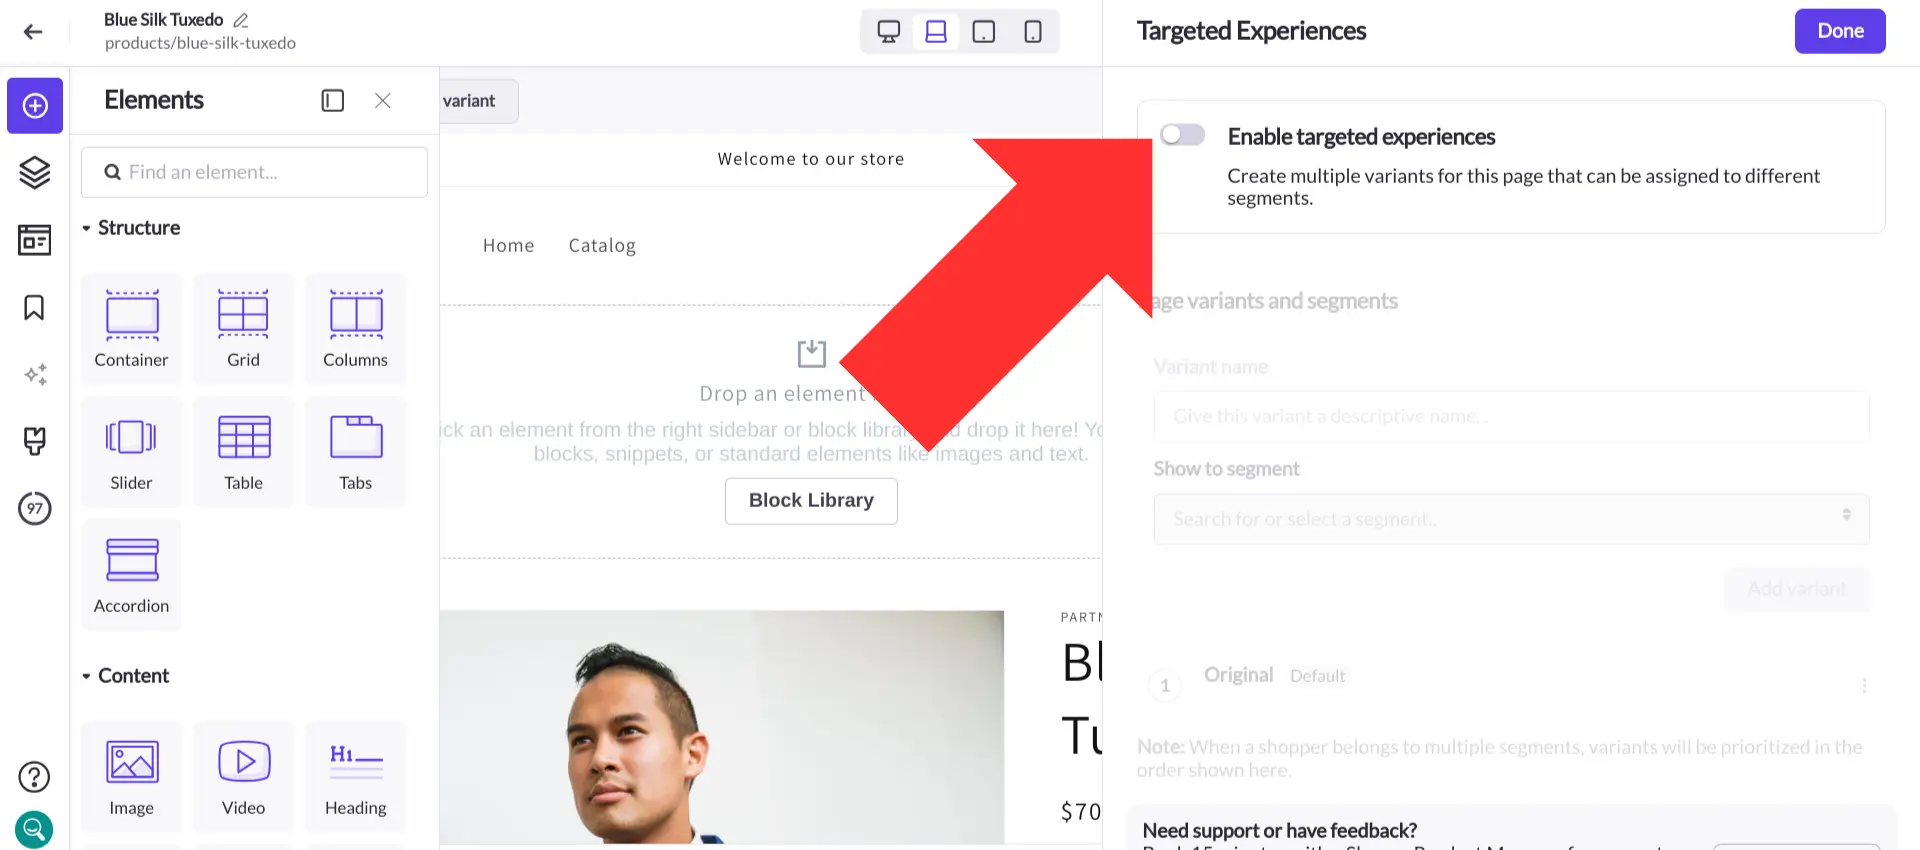 Toggle the “Enable targeted experiences” option on.